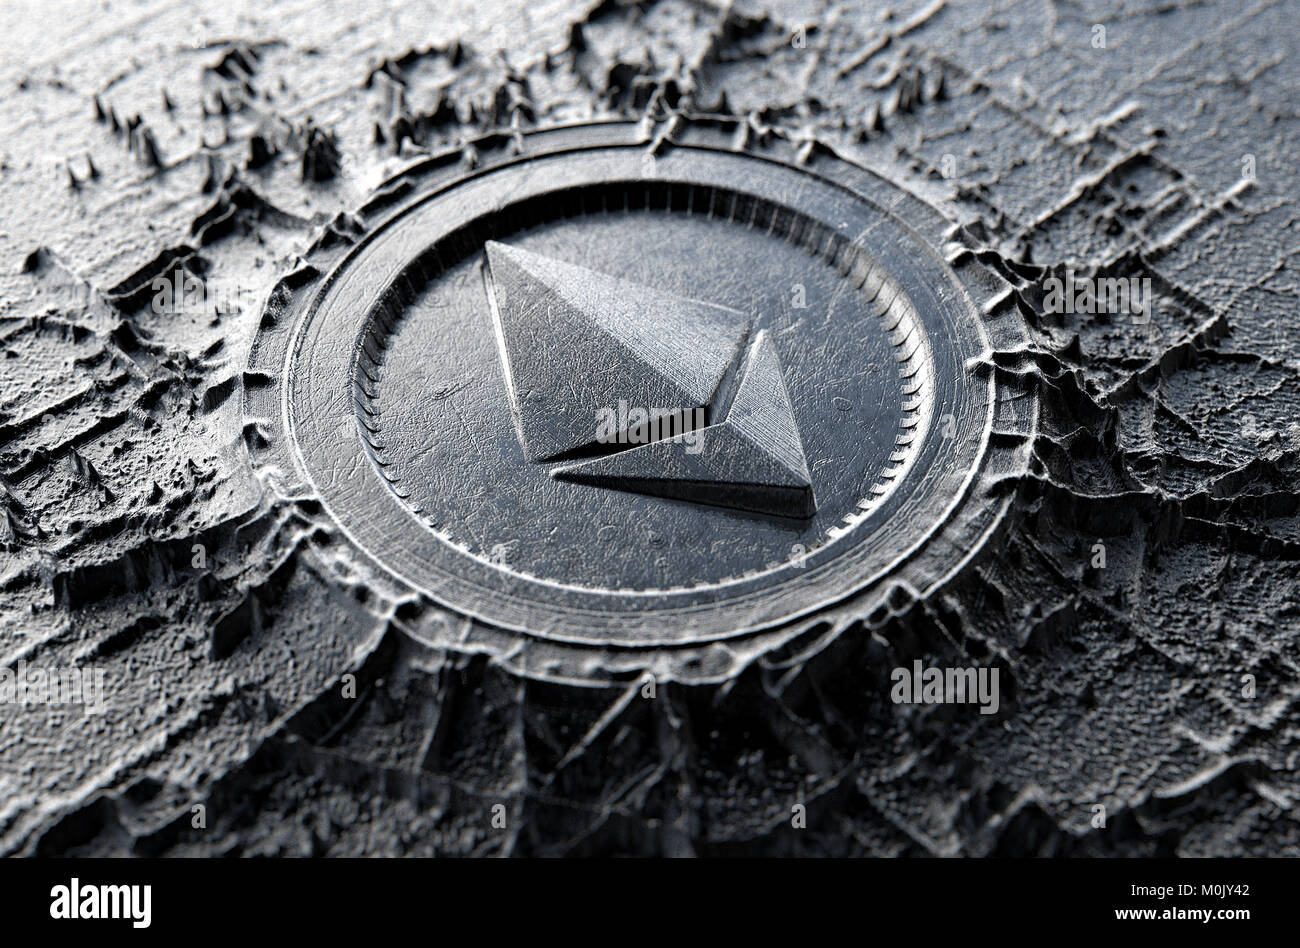 A microscopic closeup concept of cast or mined metal that builds up to form a physical ethereum cryptocurrency symbol - 3D render Stock Photo